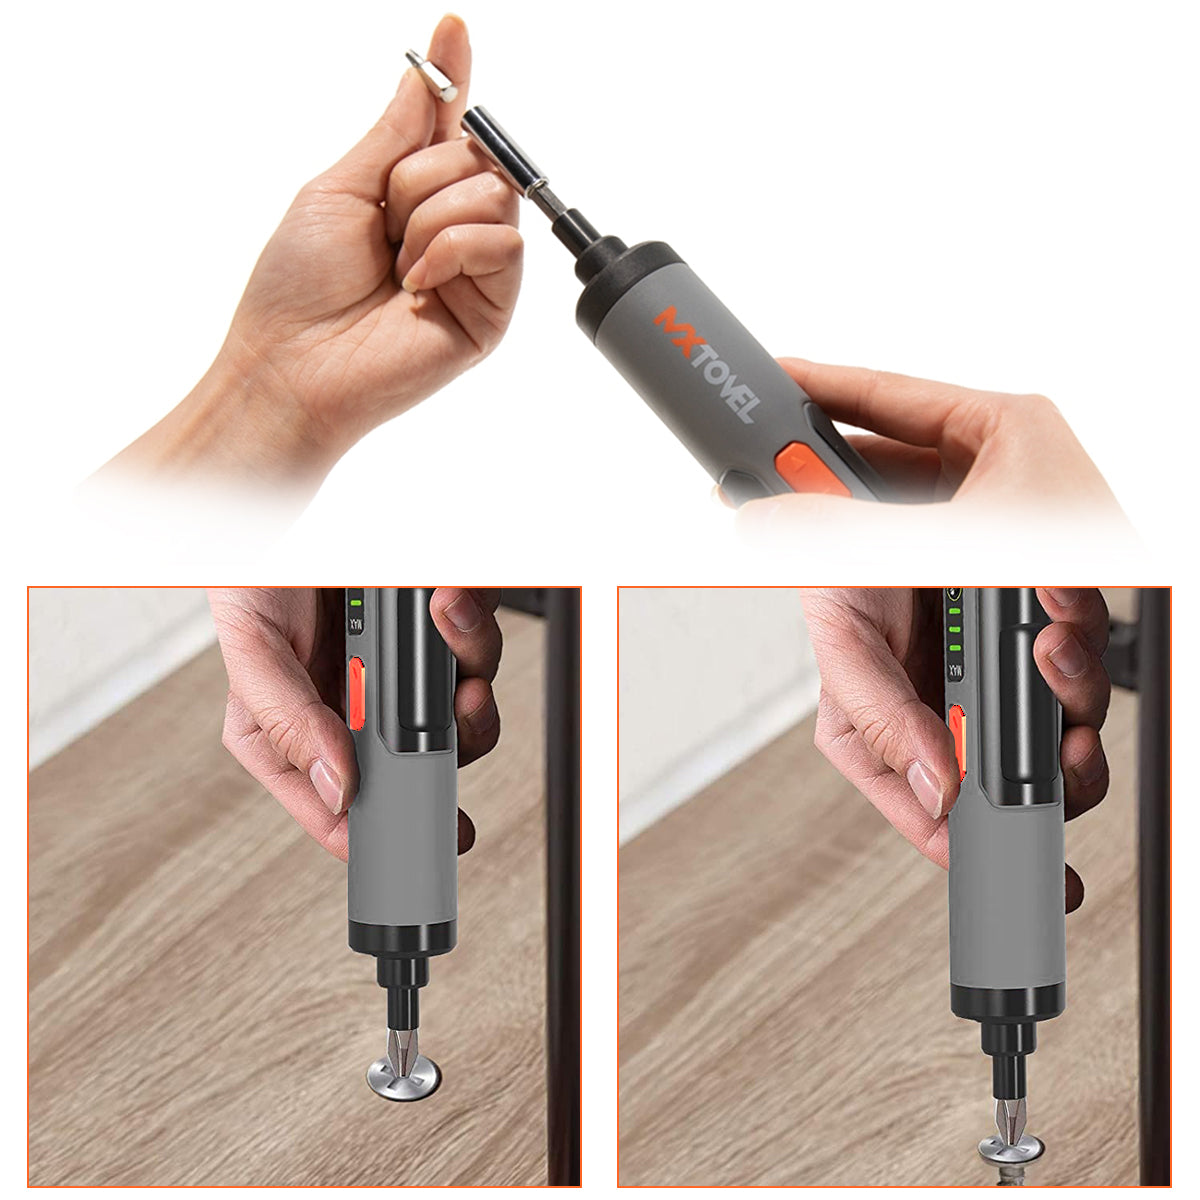 Verilux Handheld Electric Screwdriver Kit - 4V Cordless Electric Screwdriver, LED Work Light, 26 pieces Screwdriver Bits, Screw Adapter, Tool Case, USB C Cable, Power Screwdriver(Grey)